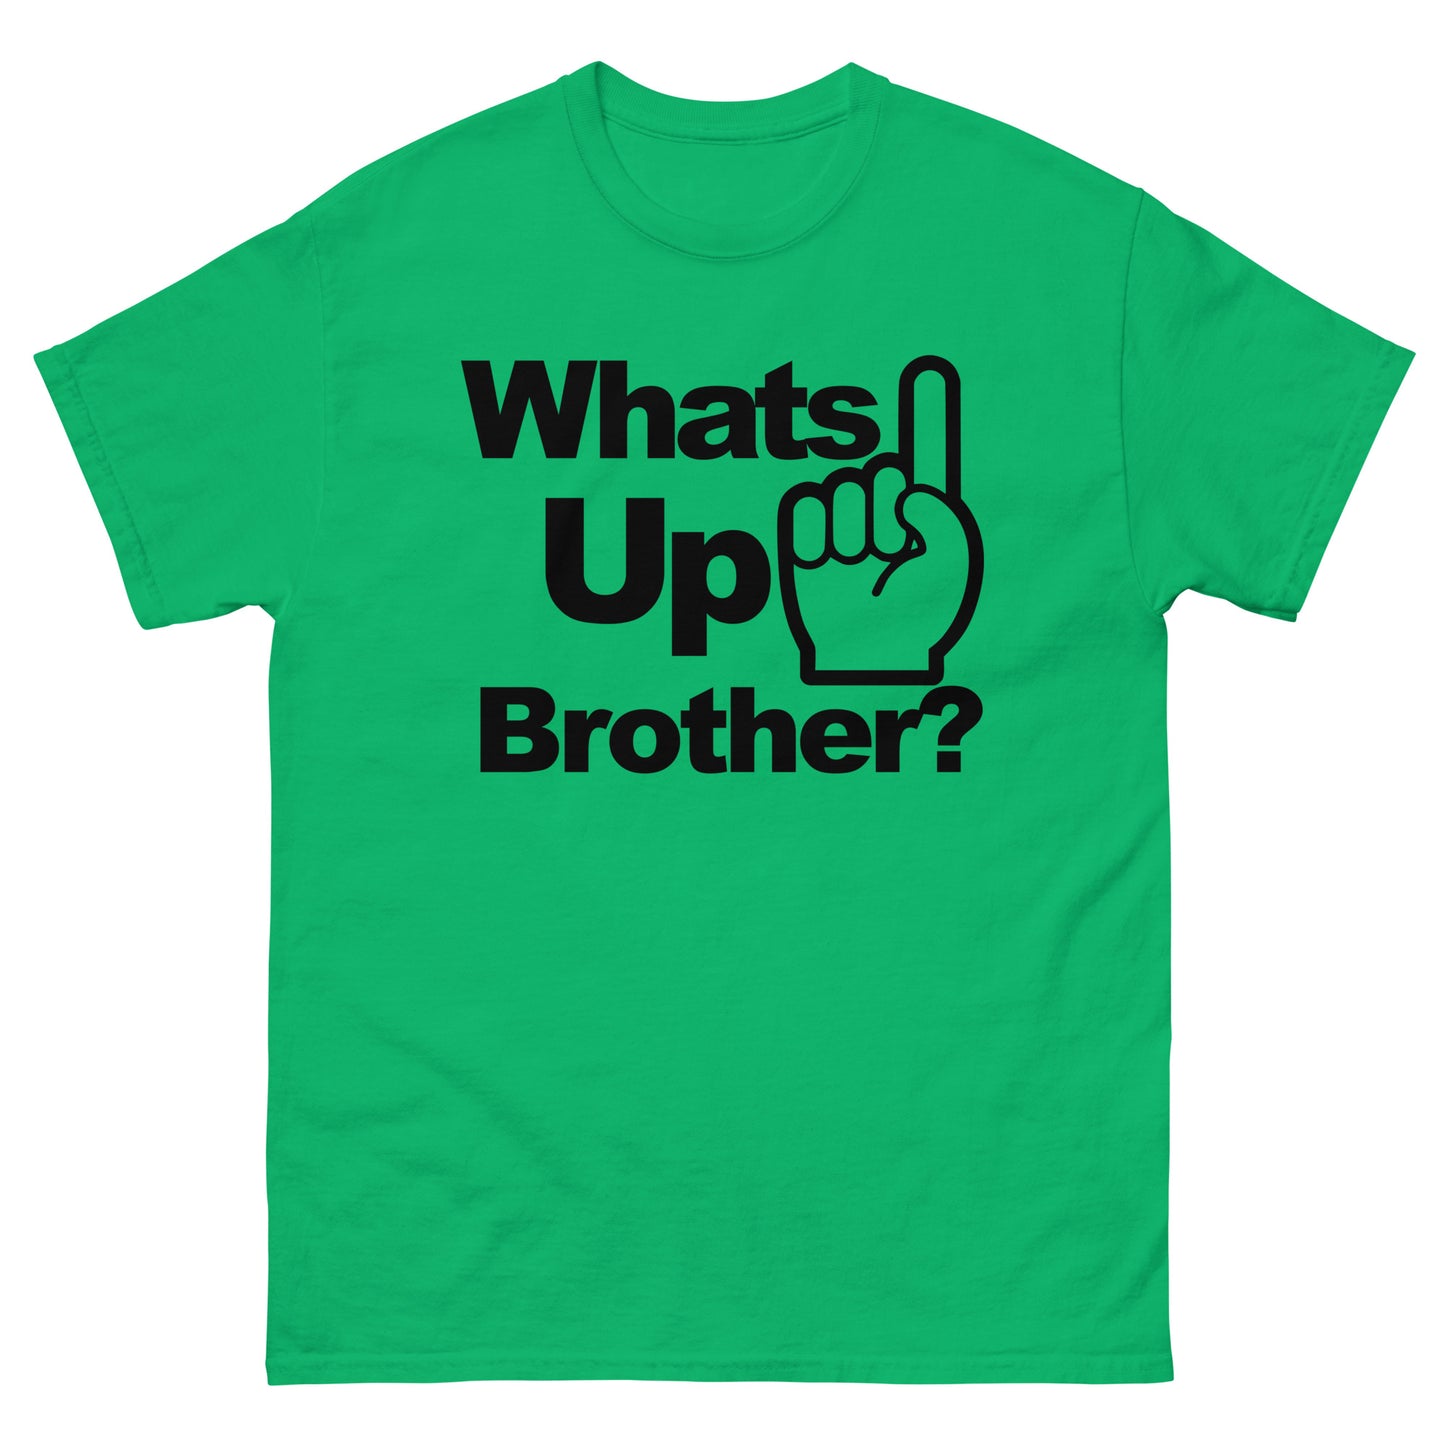 Whats Up Brother Tee 02